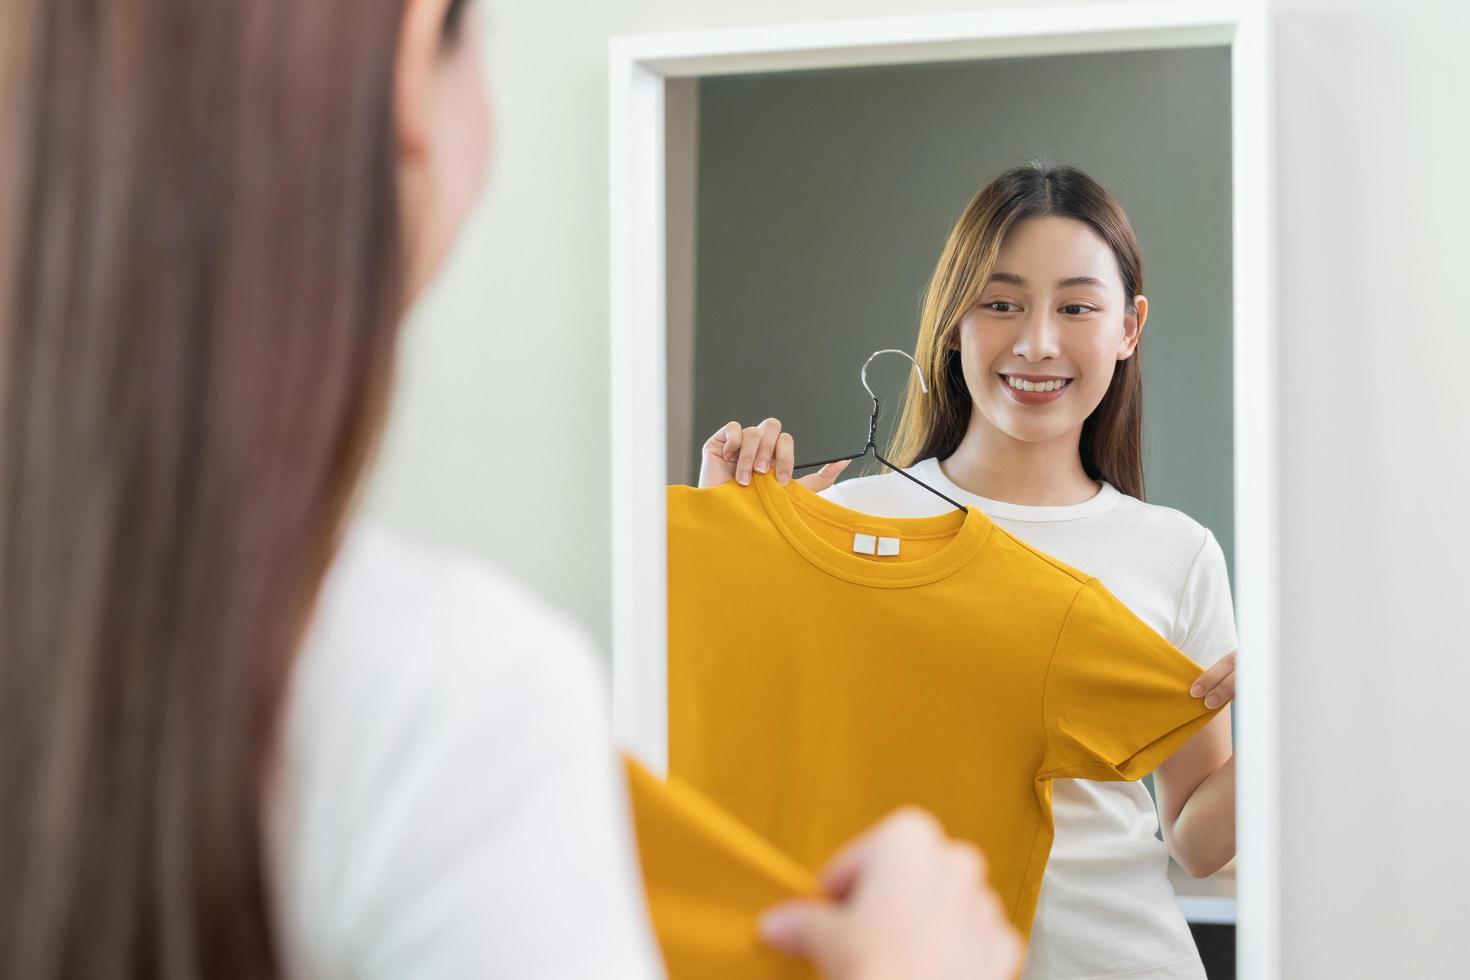 Choice of clothes,Nothing to wear. Attractive asian young woman, girl looking into mirror, try on appare, choosing dress, outfit on hanger in wardrobe at home. Deciding blouse what to put on which one photo